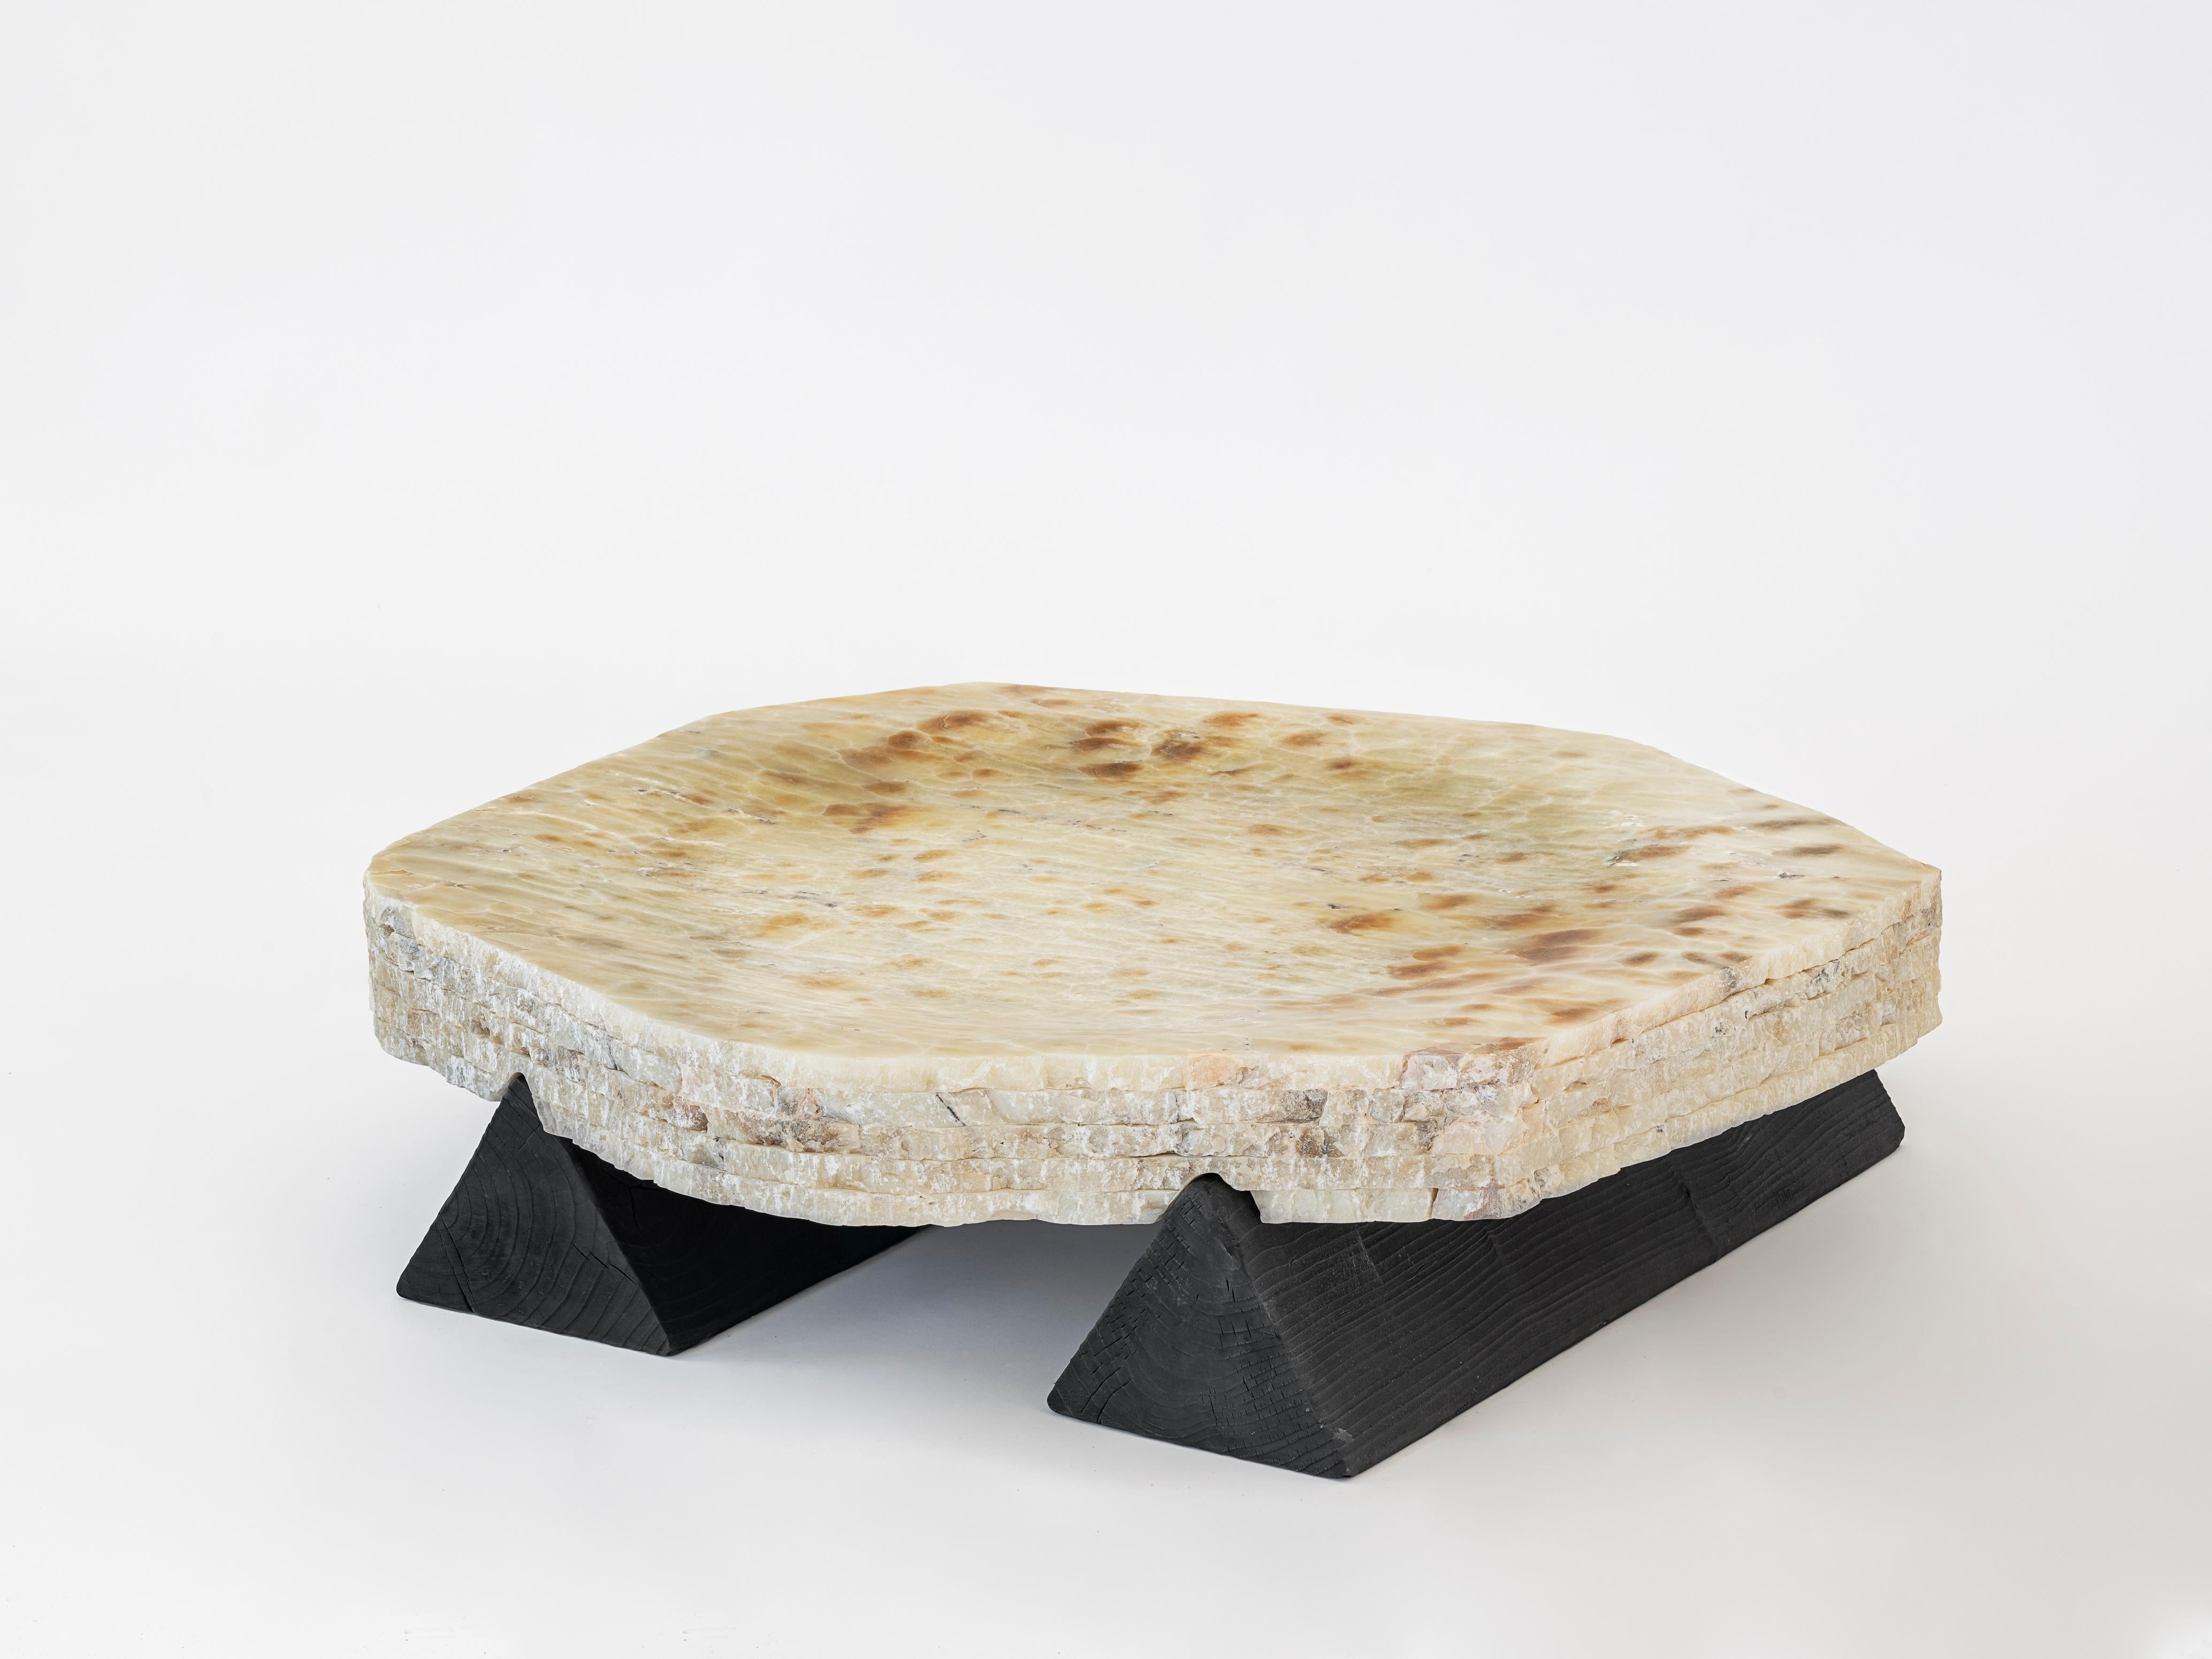 Coffee table by Studiopepe
Dimensions: D 90 x H 23 cm
Materials: Onyx

Multifaceted design agency Studiopepe was founded in Milan in 2006. Eclectic, voguish, it is the
brainchild of Chiara di Pinto and Arianna Lelli Mami, both of whom obtained